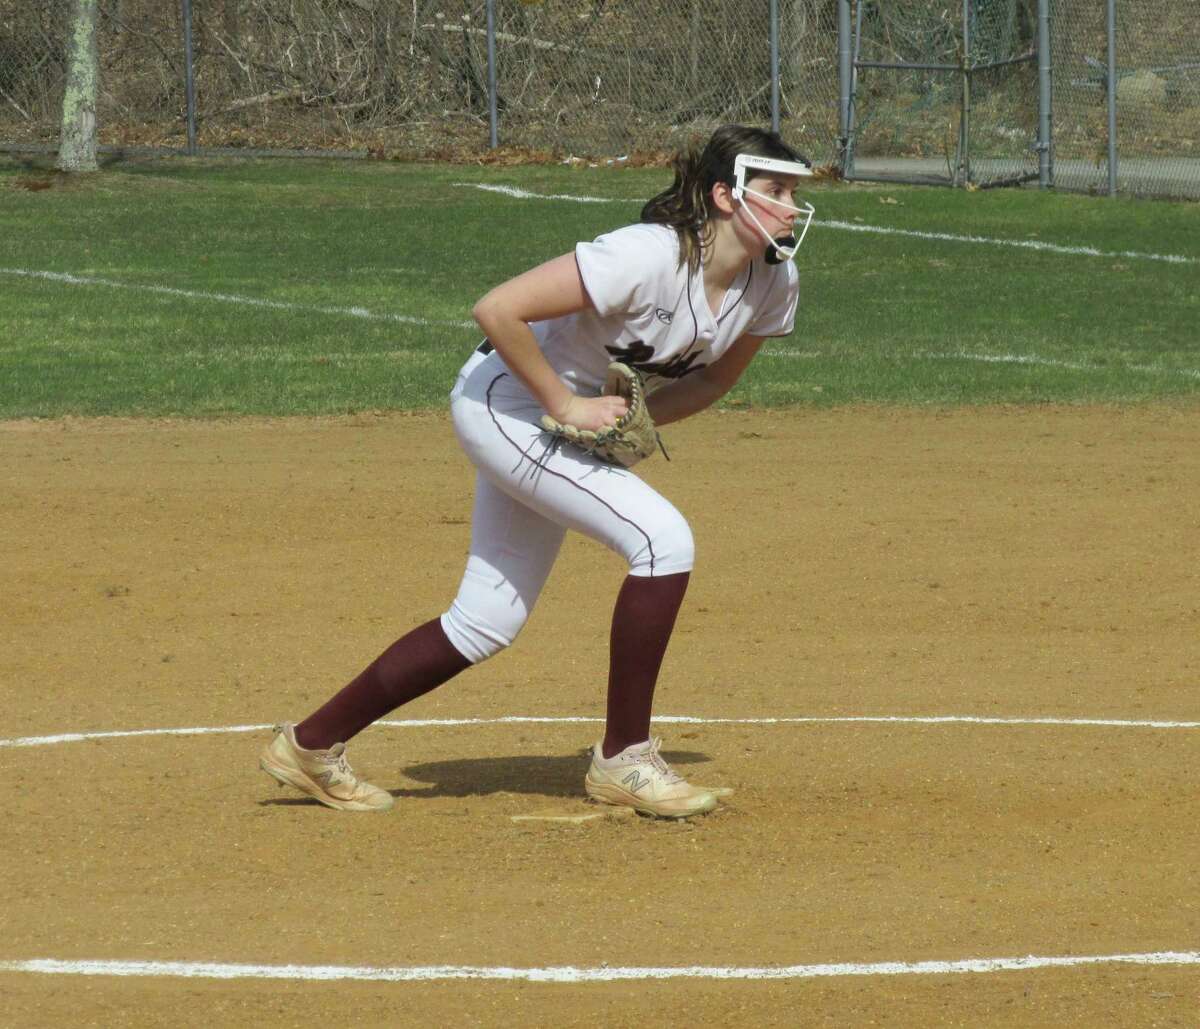 Torrington pitcher Amelia Boulli threw seven shutout innings to force extra innings. Torrington scored in the top of the eighth and Boulli completed the game, allowing two earned runs on six hits and two walks while striking out 16 to lead No. 20 Torrington over No. 13 Wethersfield 5-2 in Class L.